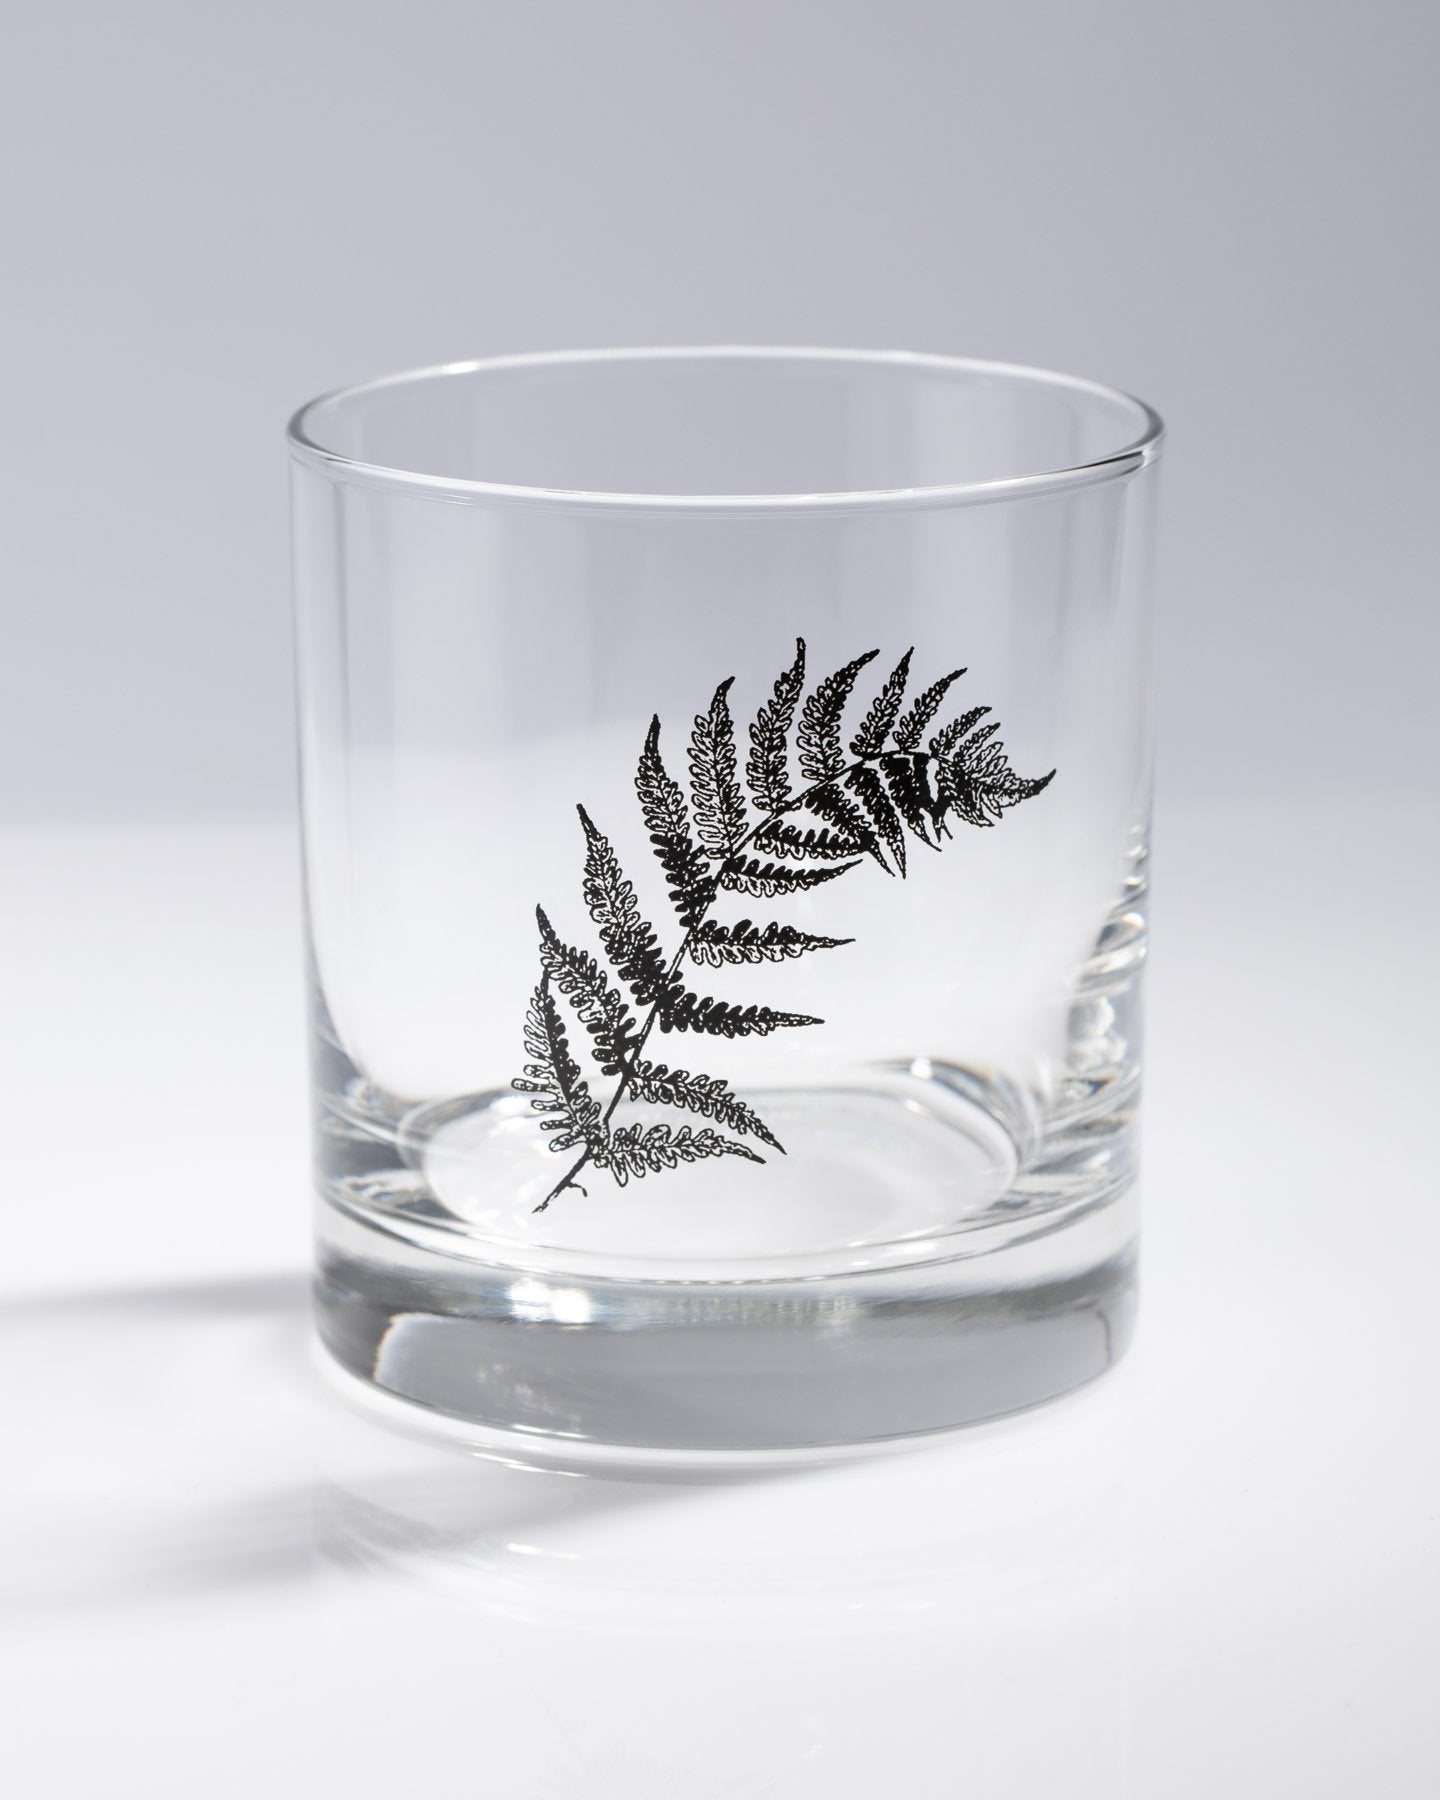 Fern Cocktail Candle